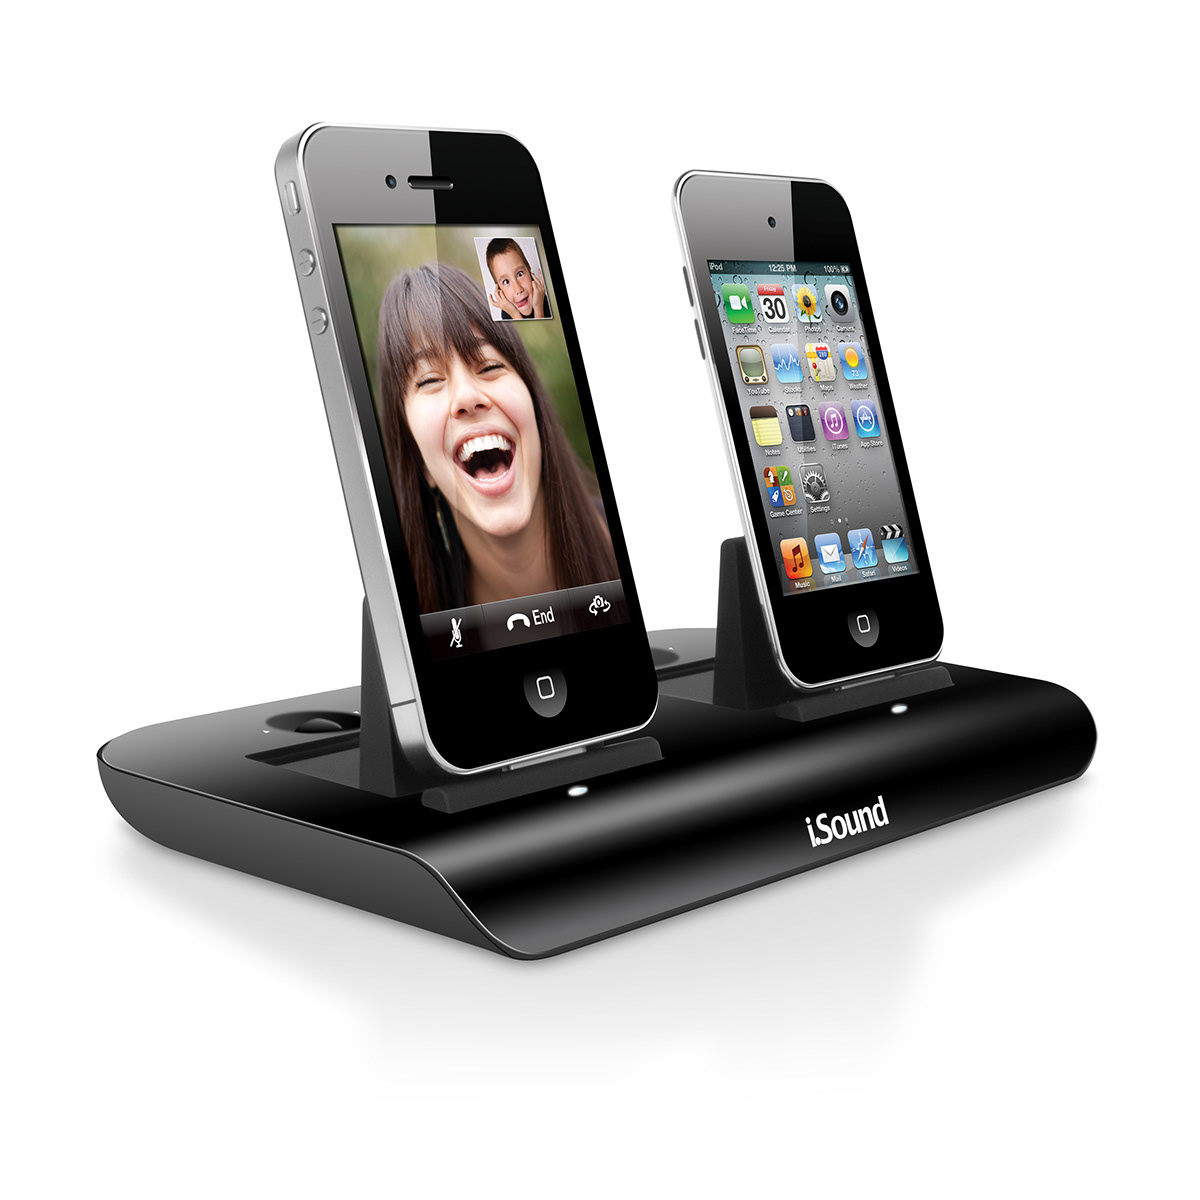 i.Sound isound charging dock charging dock dual power view power view view pro s michael ponce ponce iphone ipod apple iPad